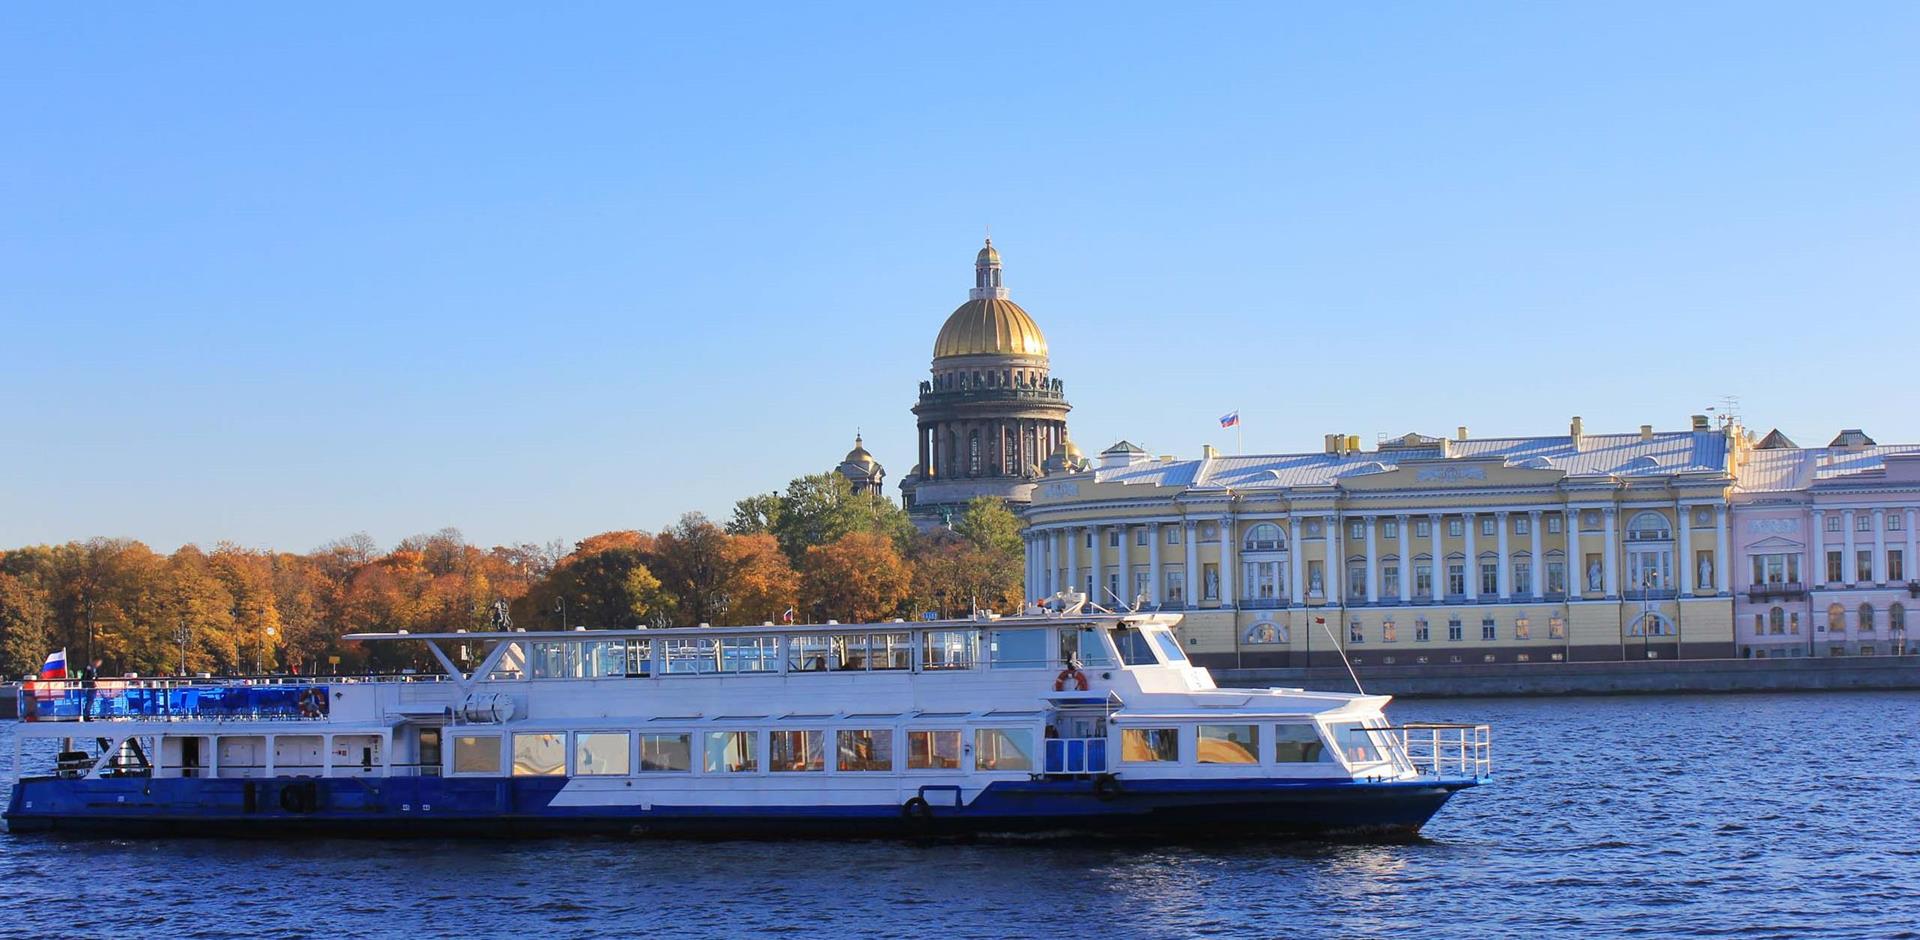 Yusupov Palace and canal-boat cruise, Russia